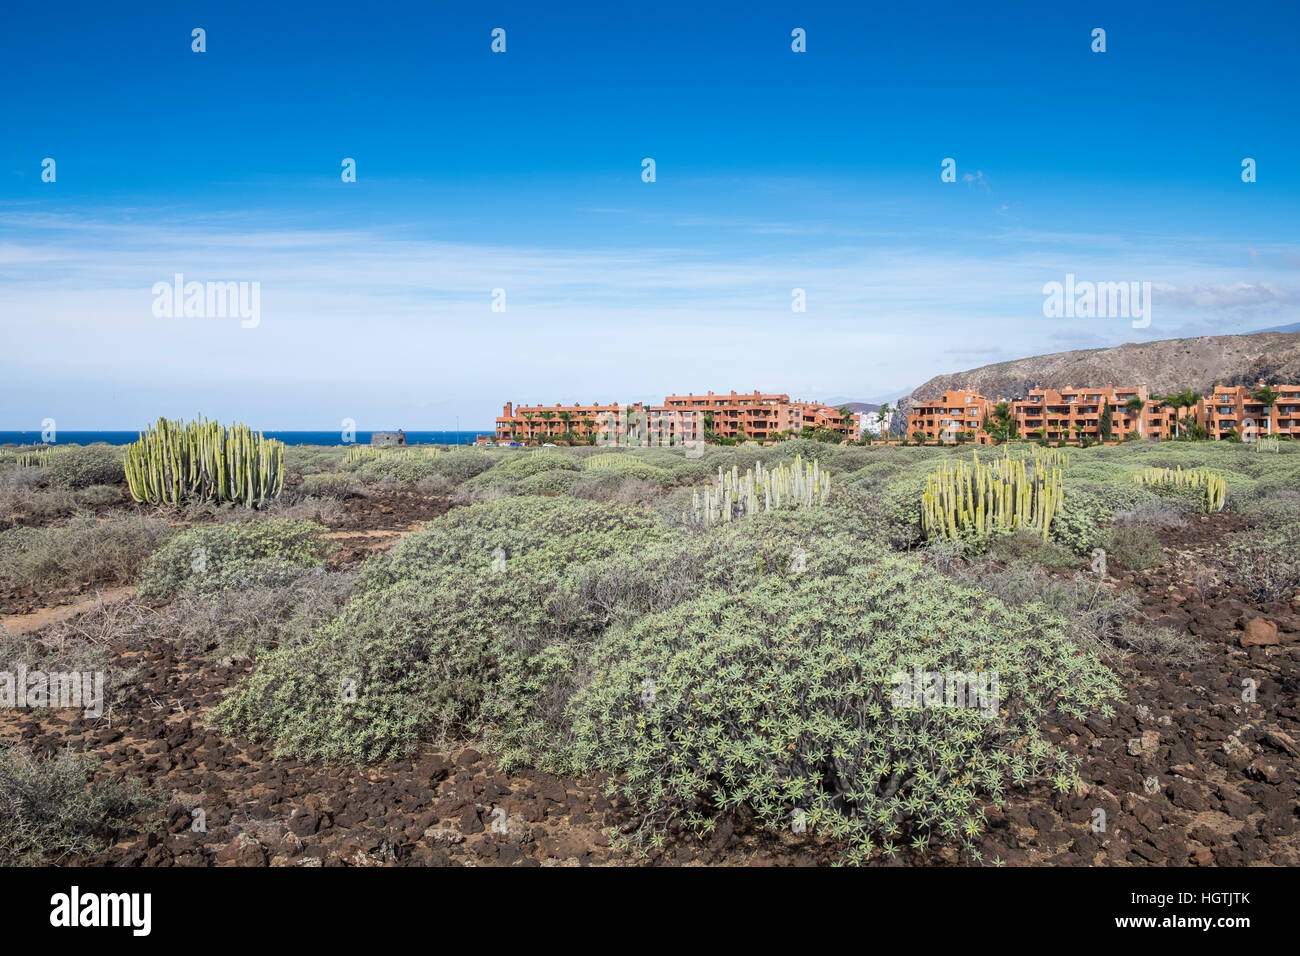 El Palm Mar urbanisation at the base of Guaza mountain next to the coast in Tenerife, Canary Islands, Spain Stock Photo